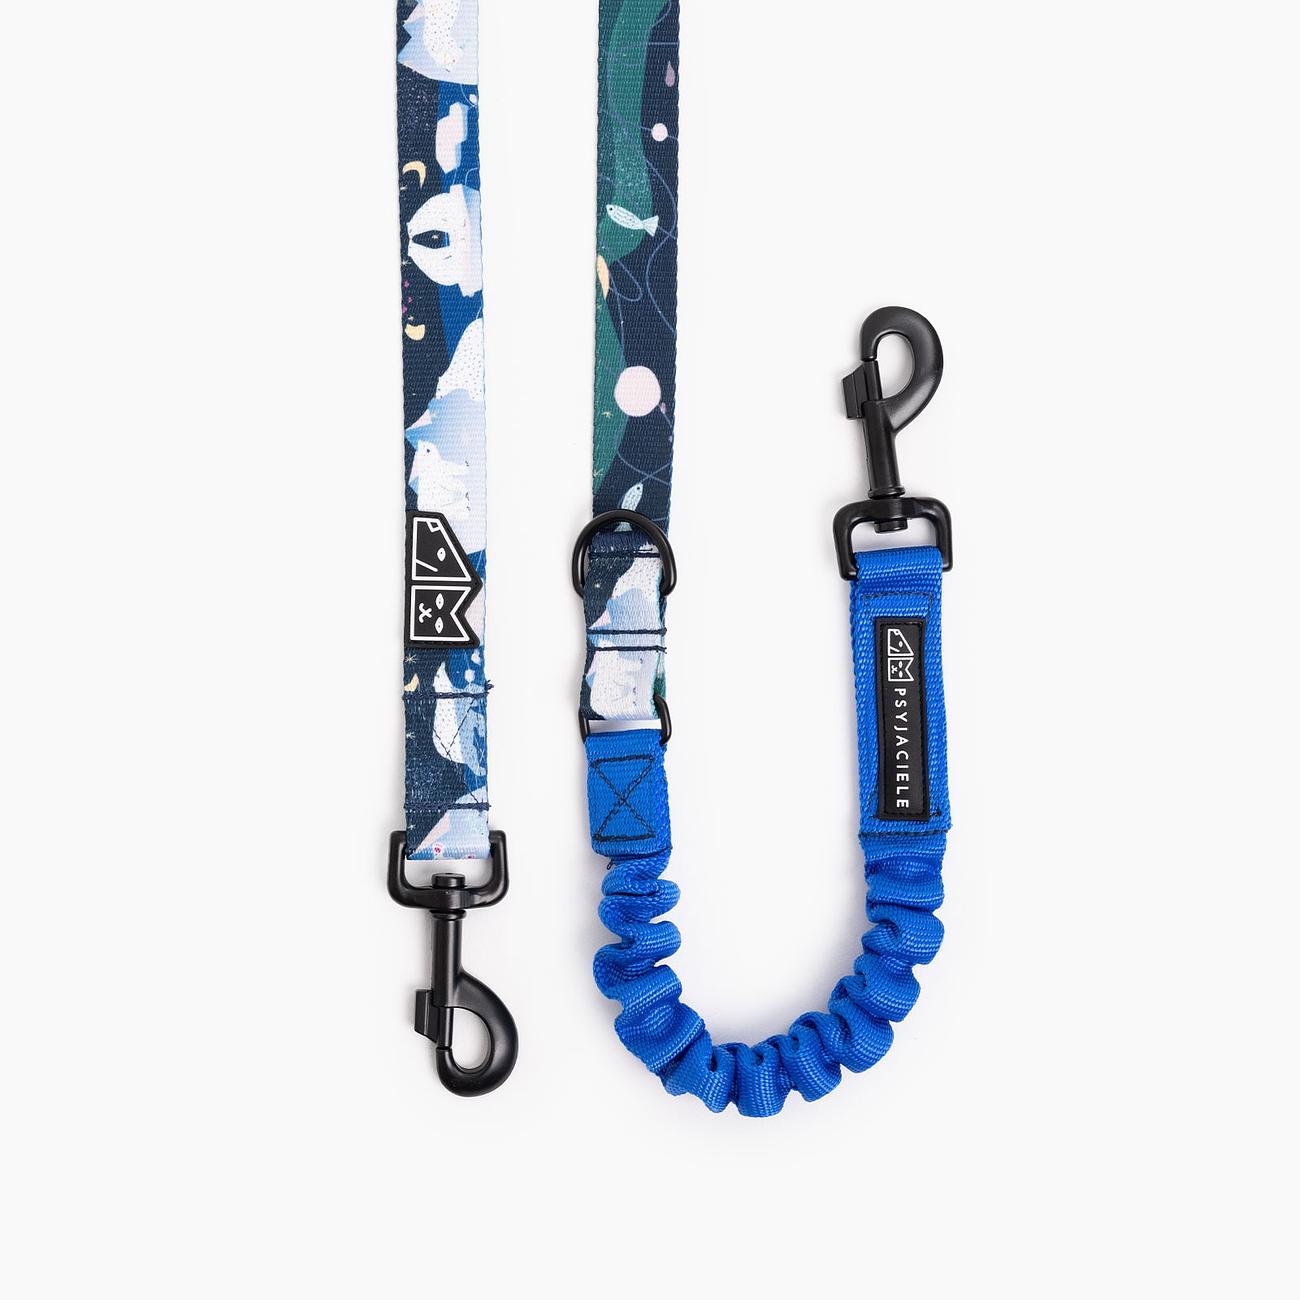 "Polar pattern" leash with a shock absorber